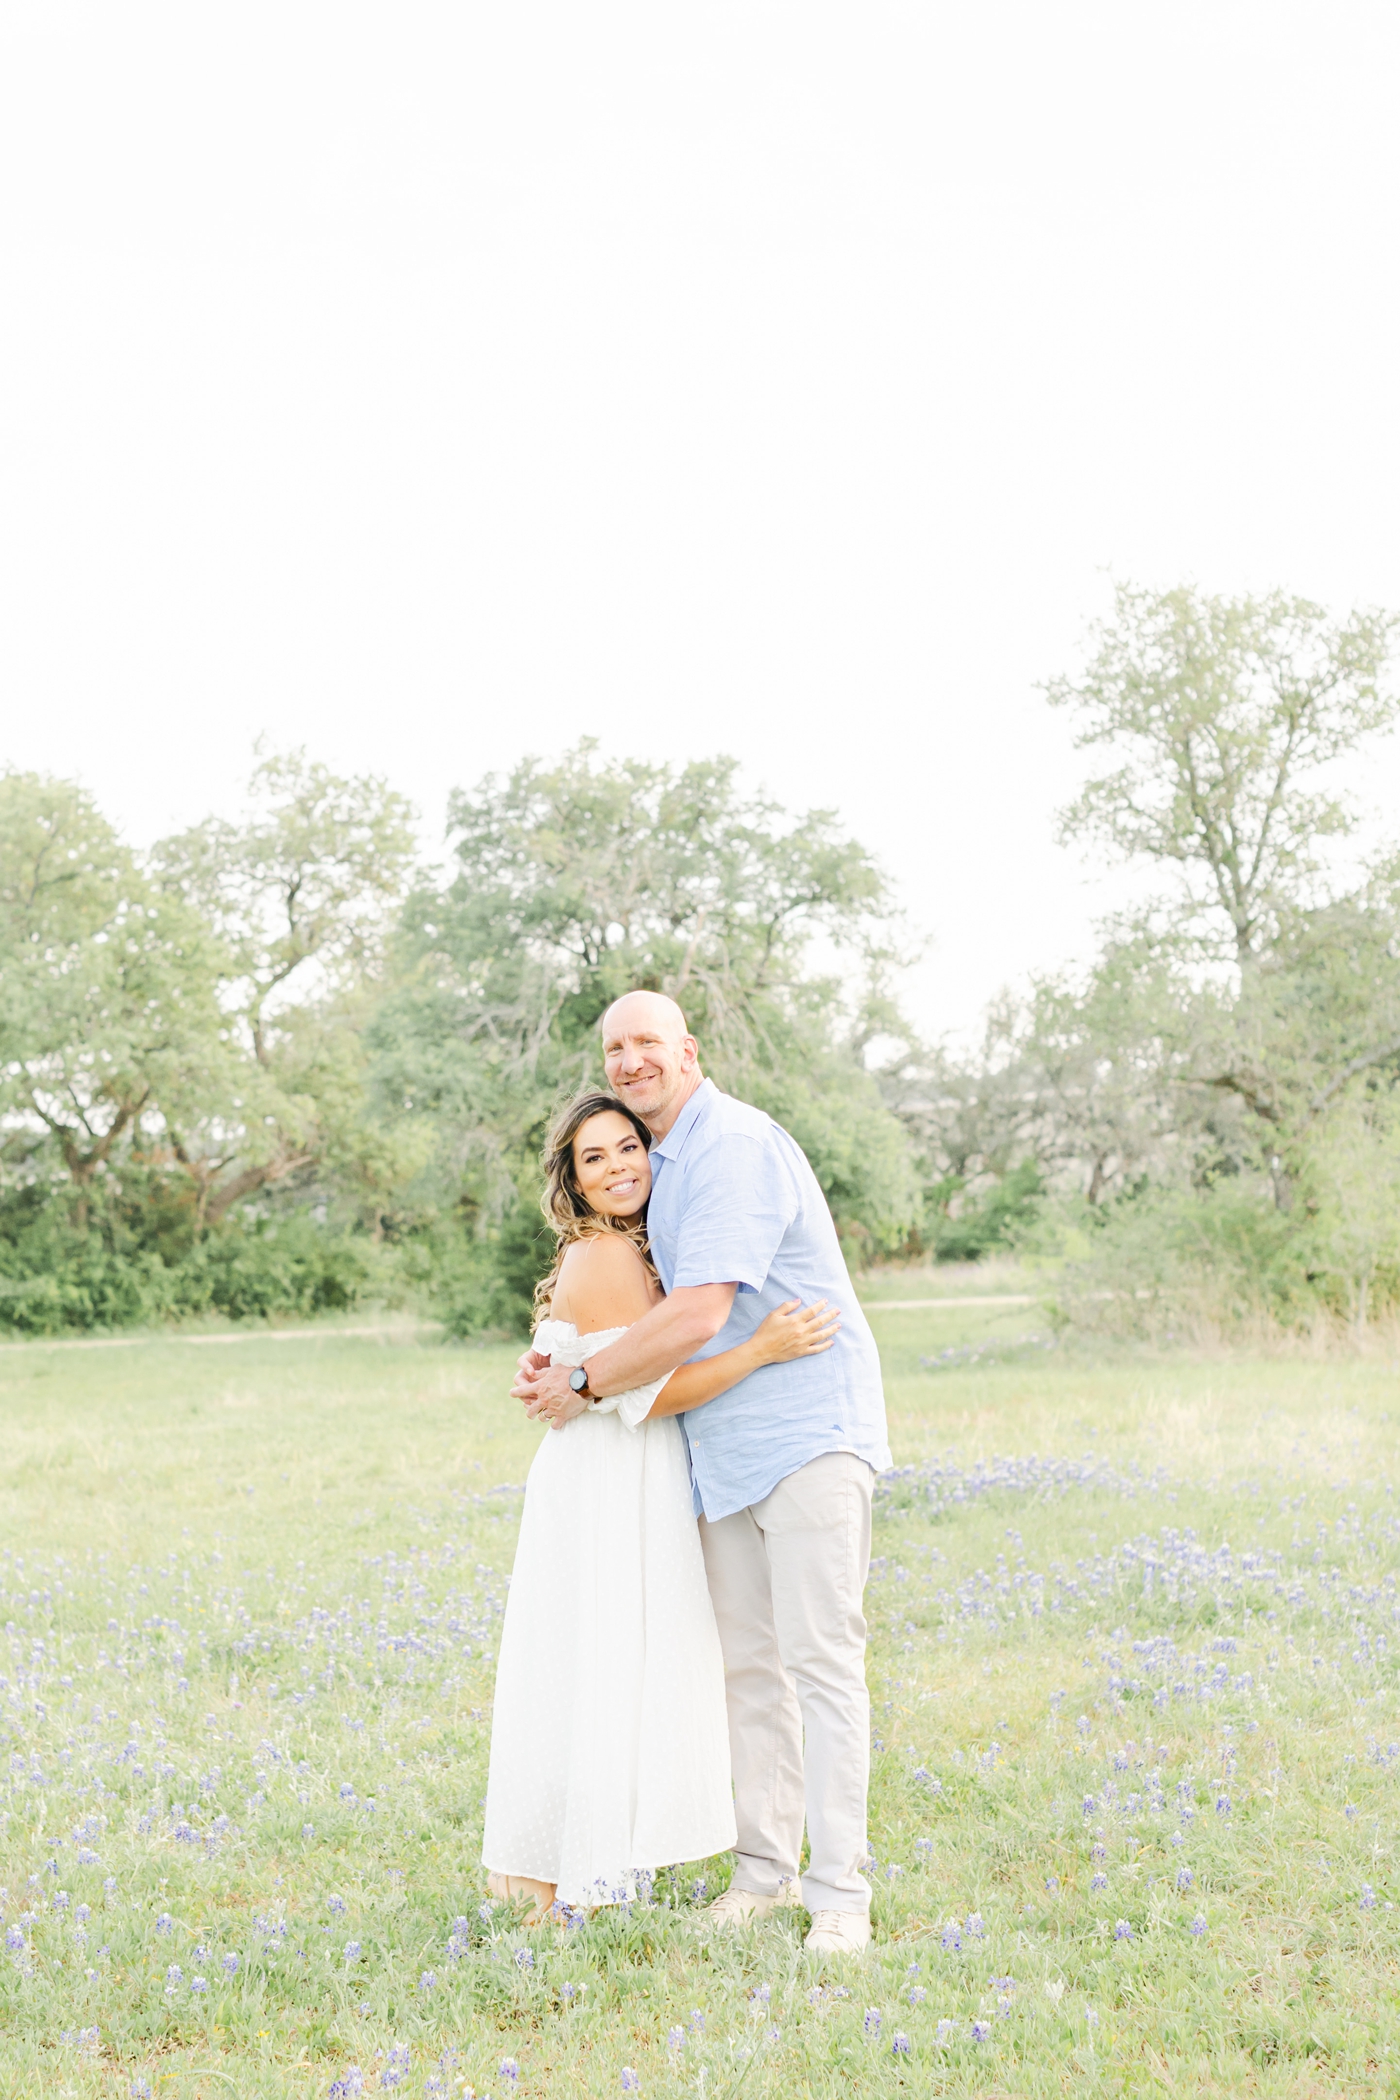 Mom and Dad smiling together in field of wildflowers in Cedar Park, TX. Photo by Sana Ahmed Photography.